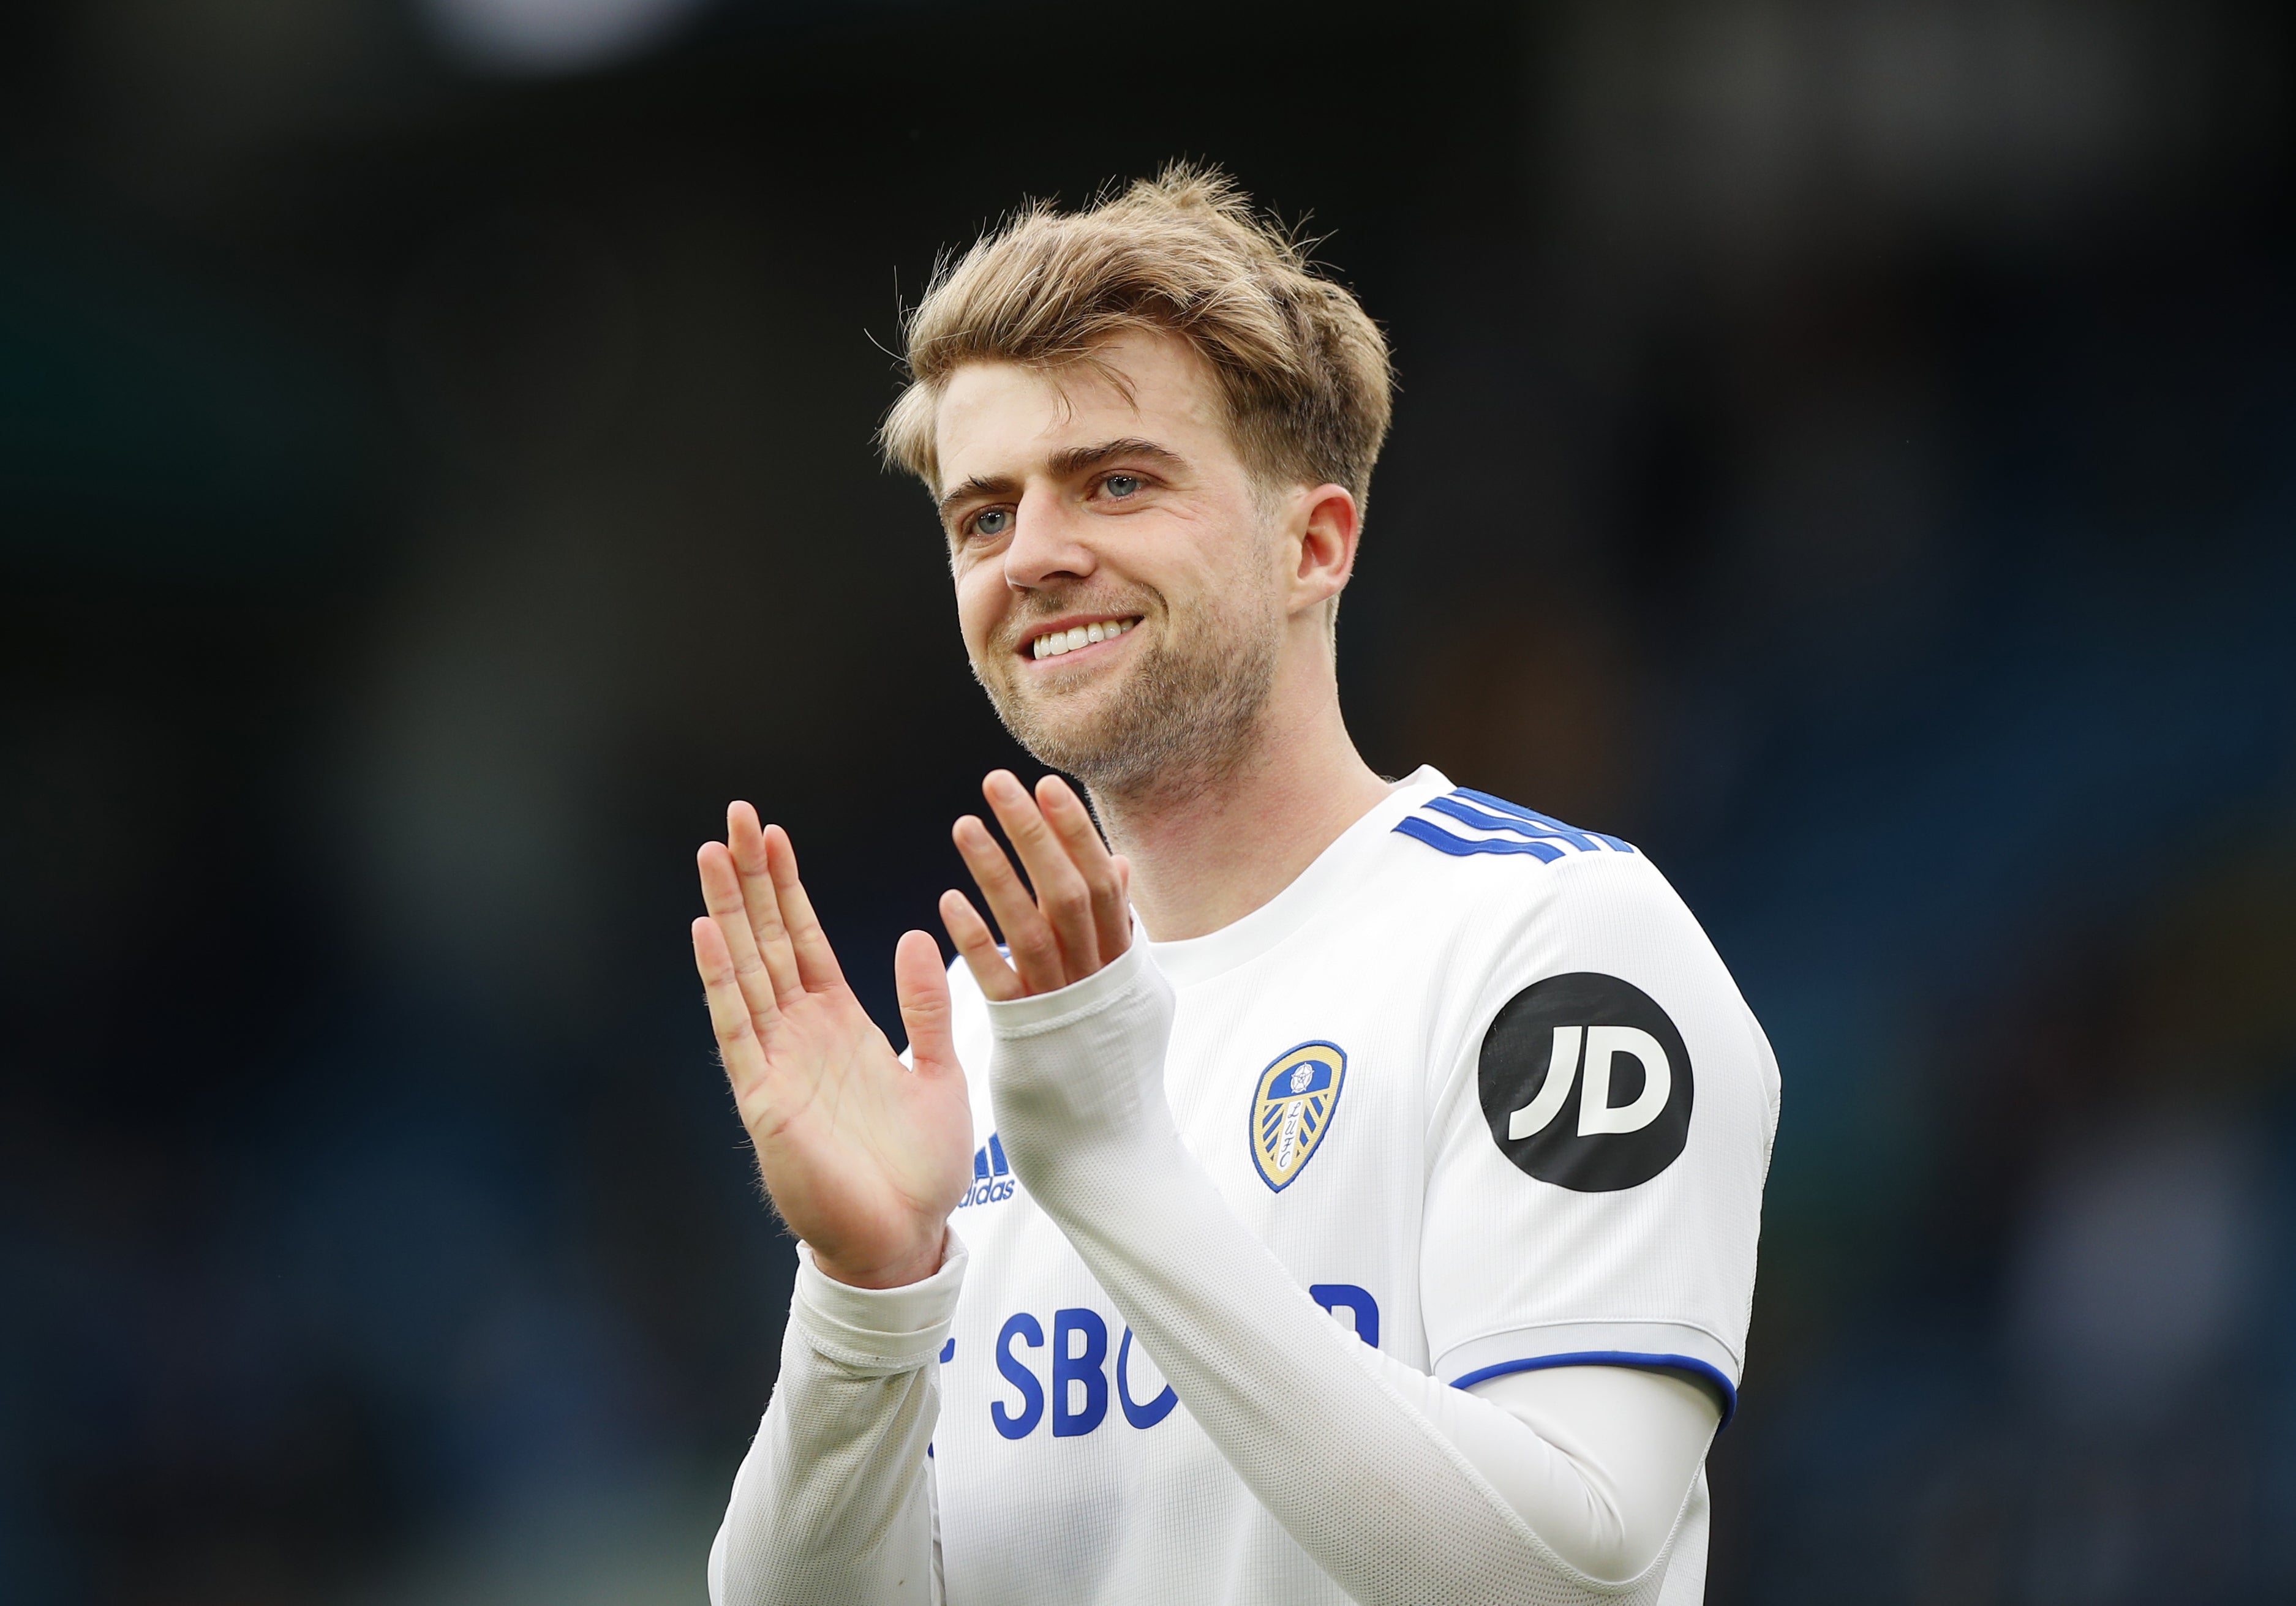 Leeds’ Patrick Bamford has recently received his first England call-up